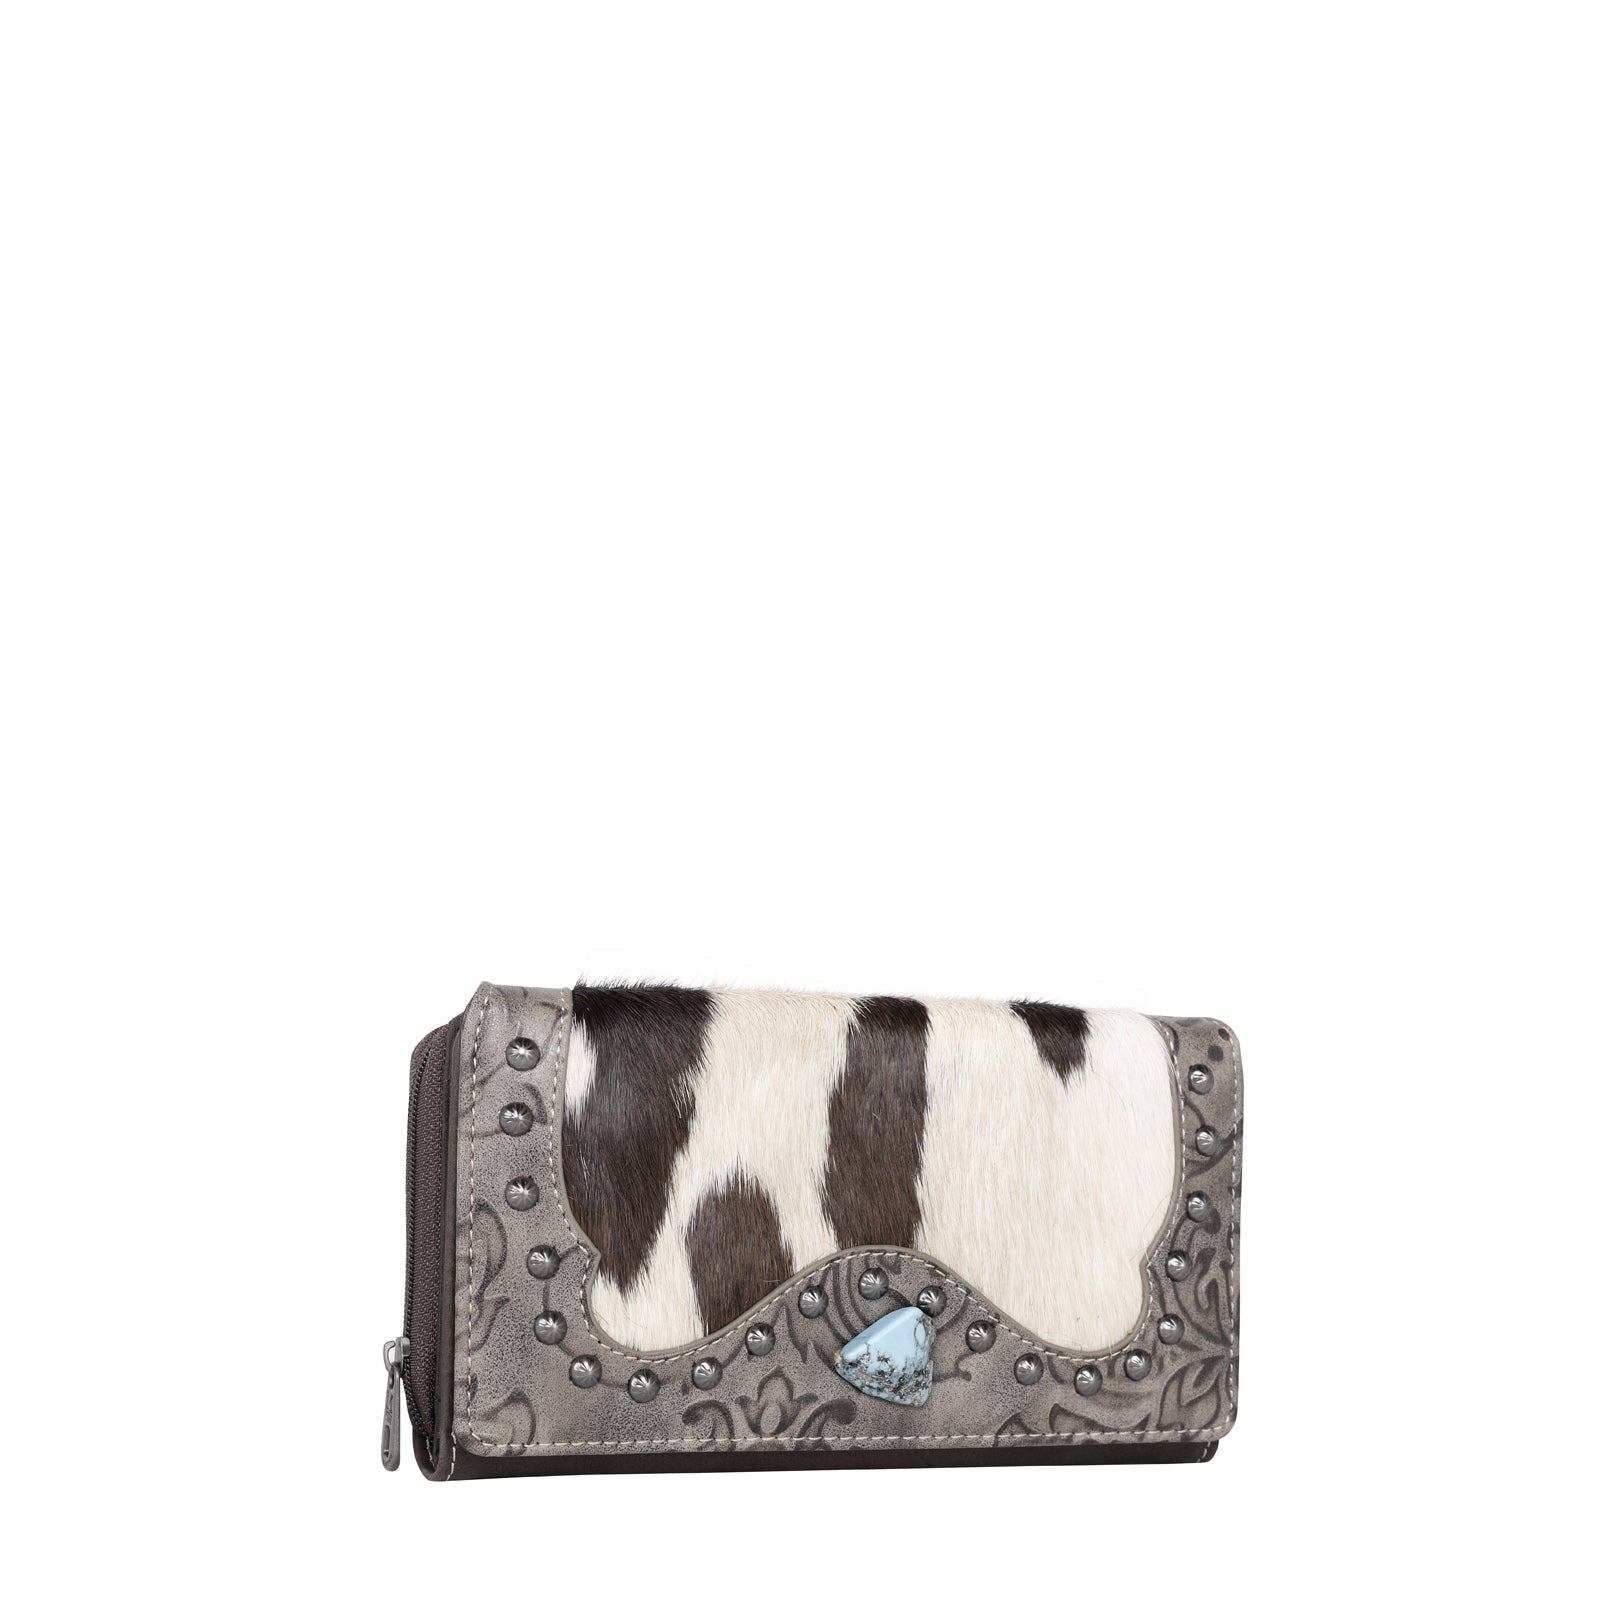 Montana West Hair-On Cowhide Wallet - Montana West World